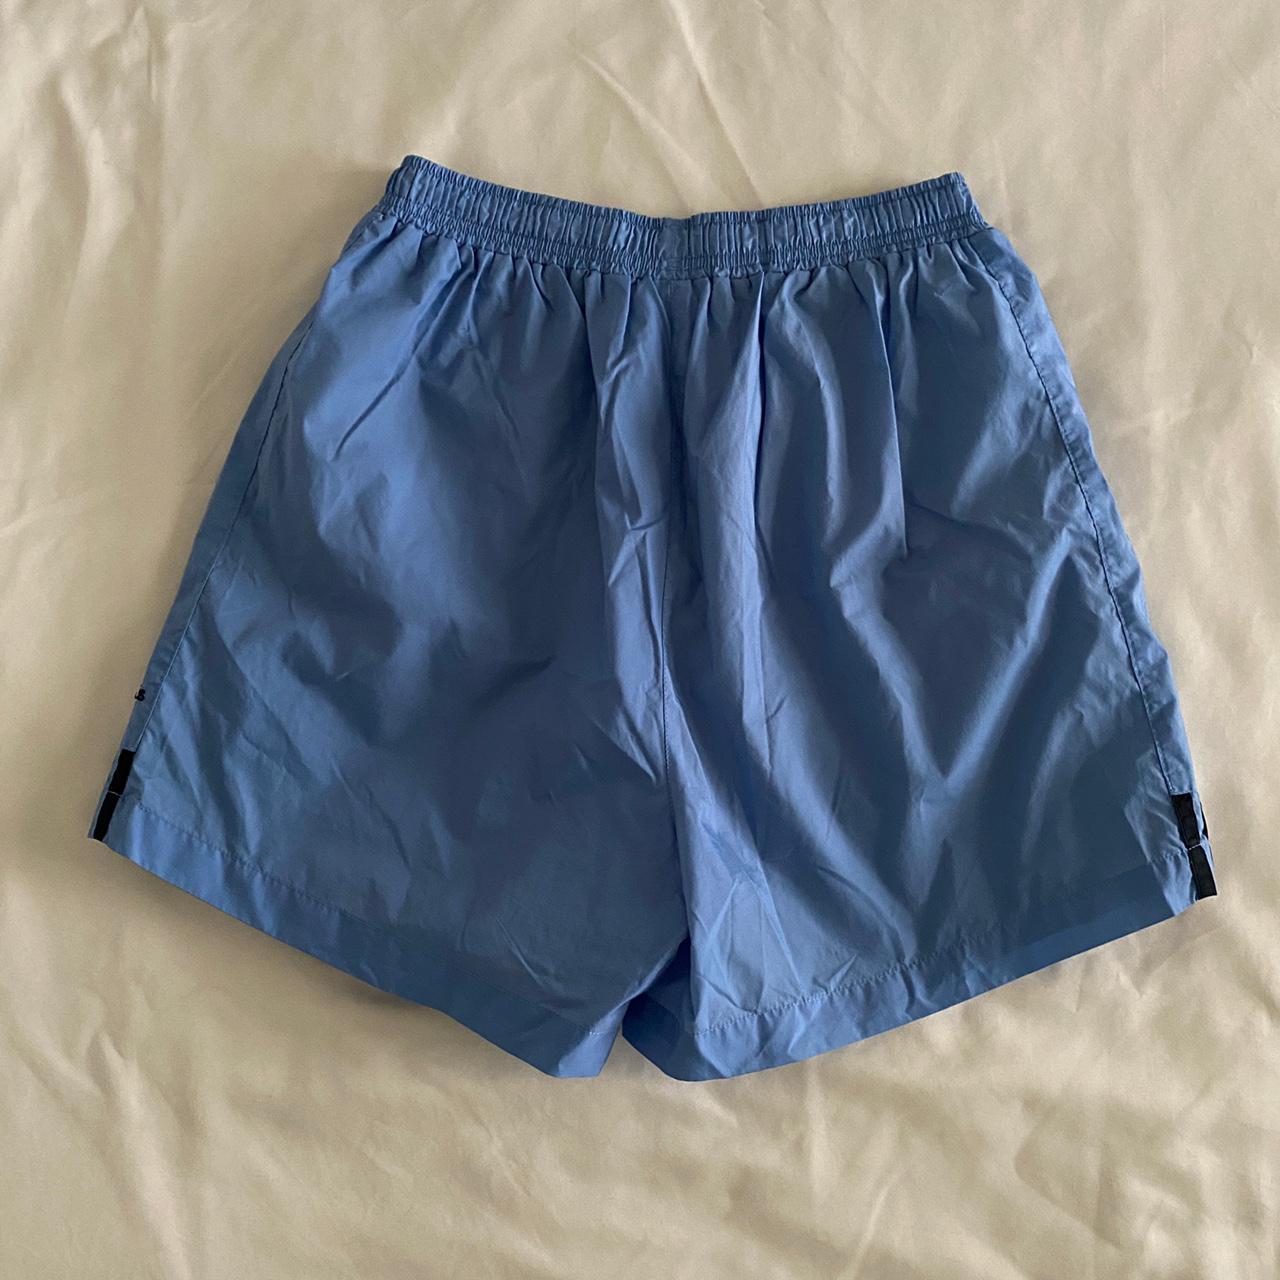 Blue Vintage Adidas Shorts | the tag has been ripped... - Depop